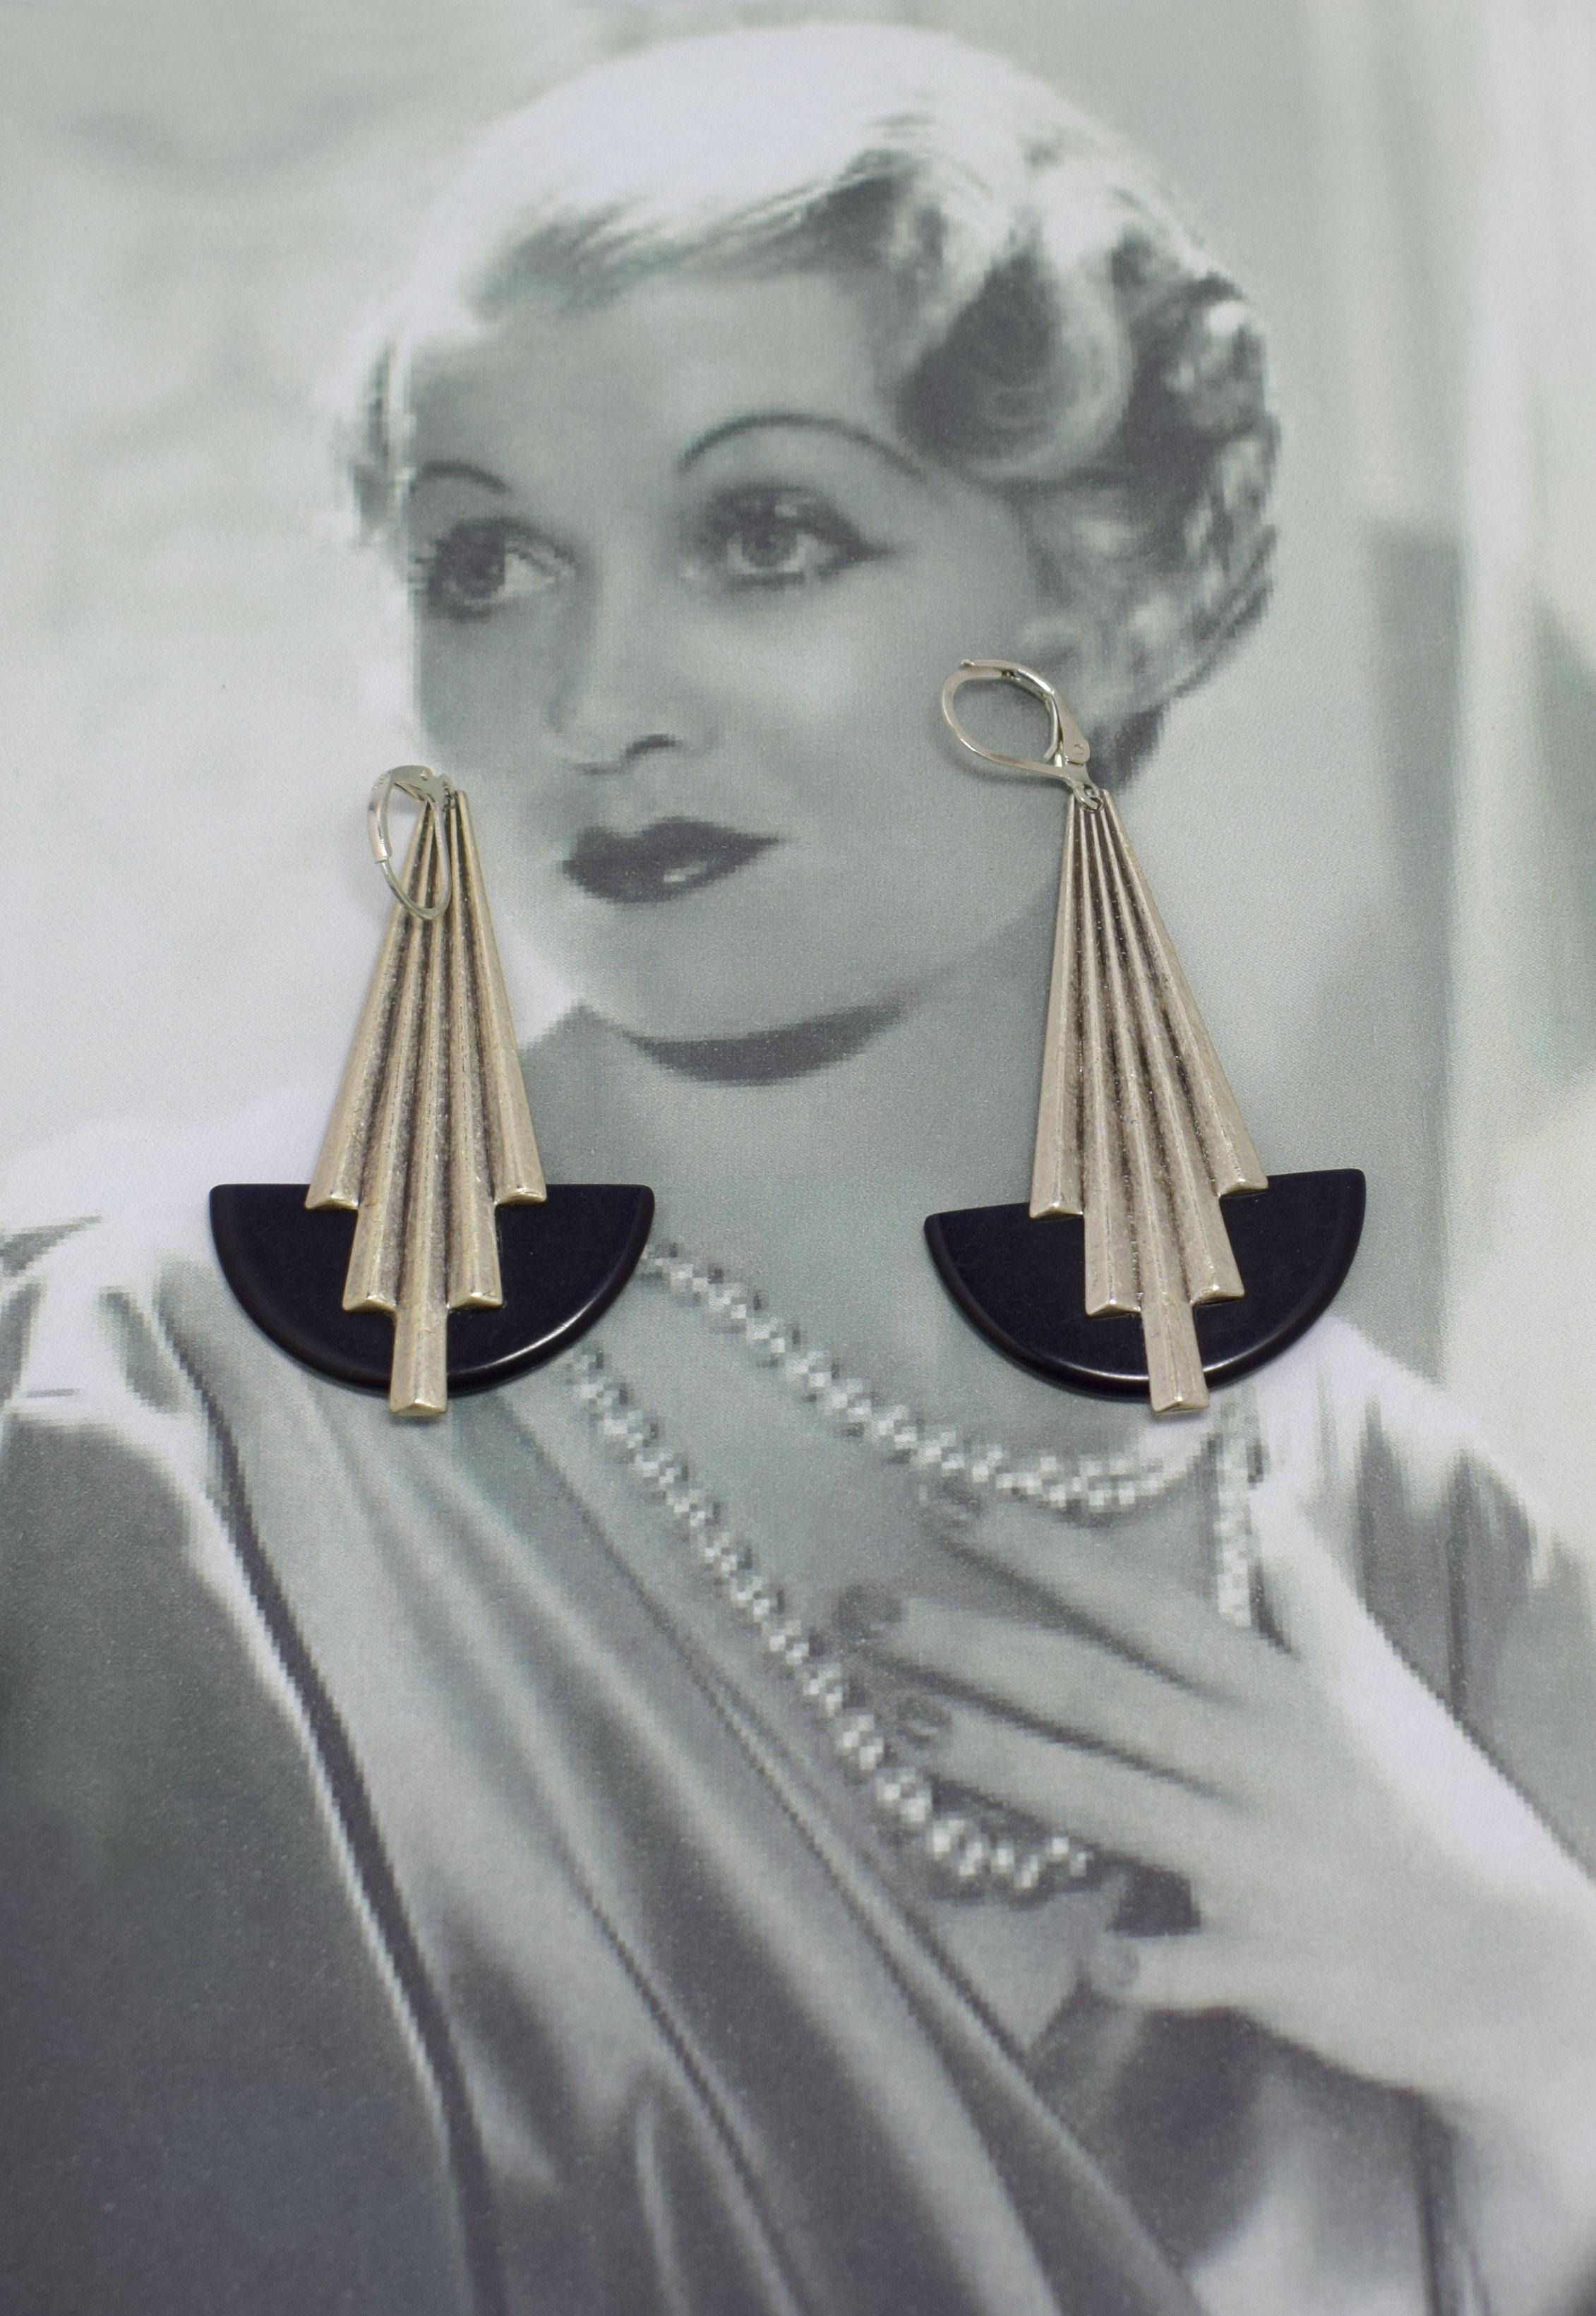 A fabulous pair of Art deco earrings in Black phenolic bakelite and silver plated metal ( the silver has a oxidised , aged finish). Great iconic design any ladie who loves Art Deco would love. As one of the leading manufacturers of jewellery